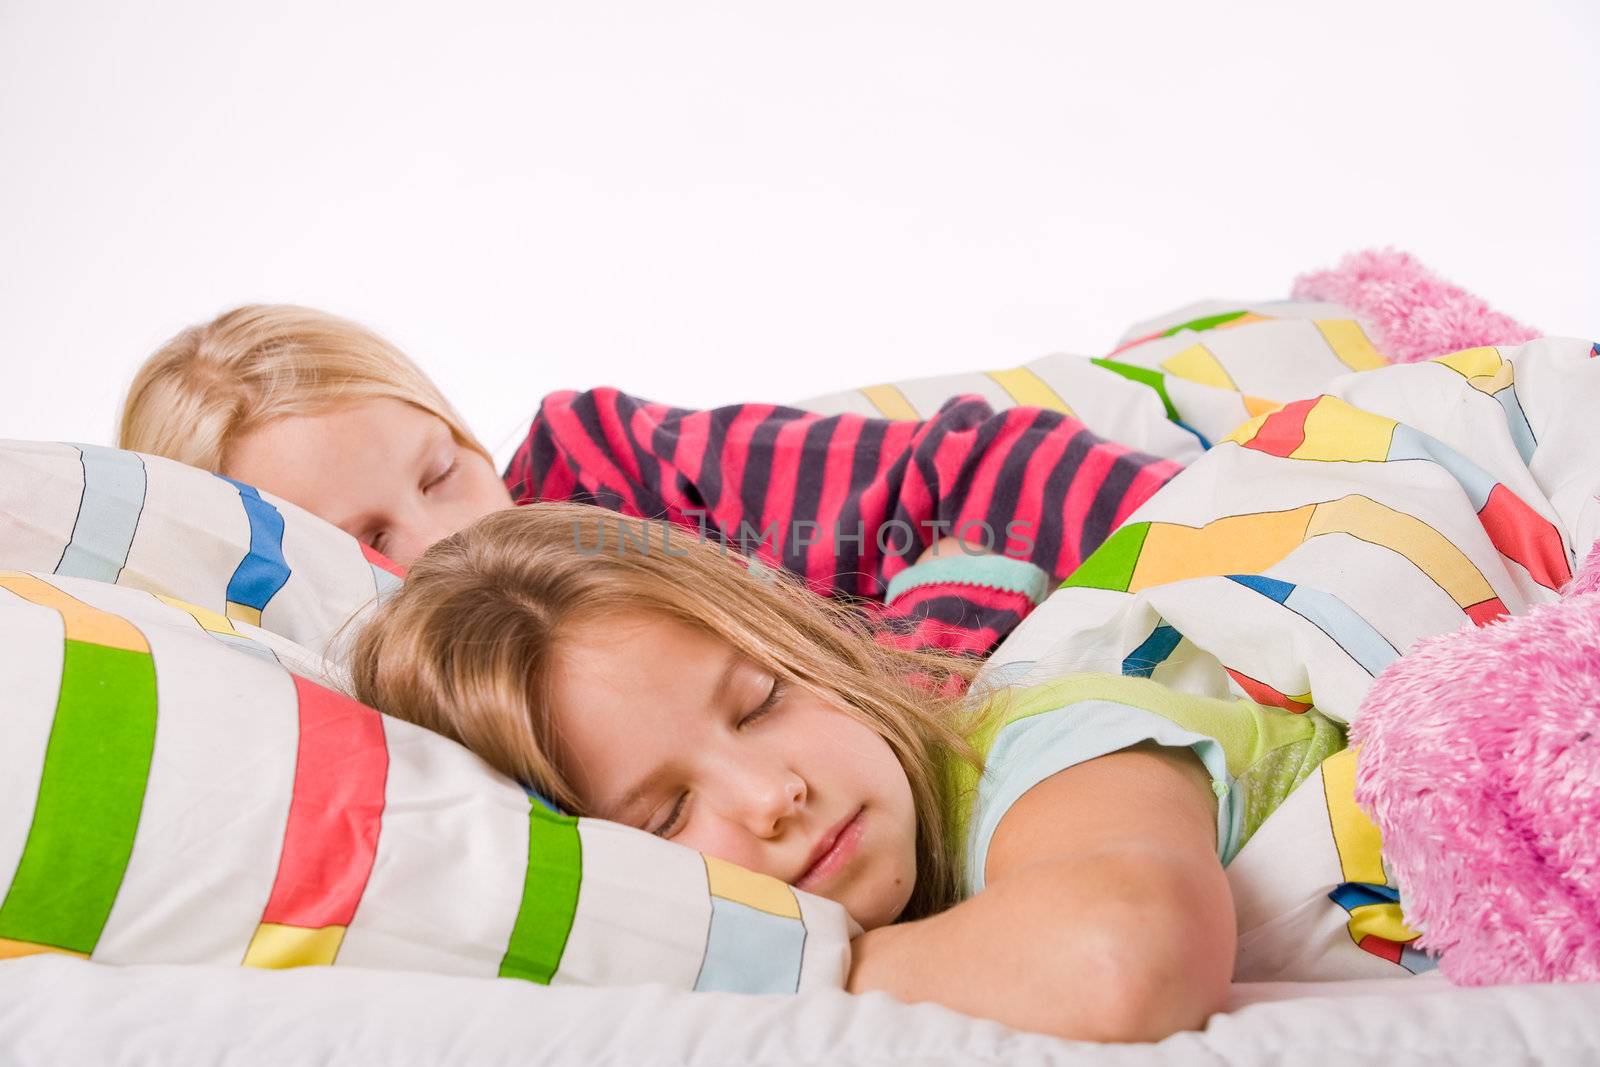 Two young children enjoying their colorful bed